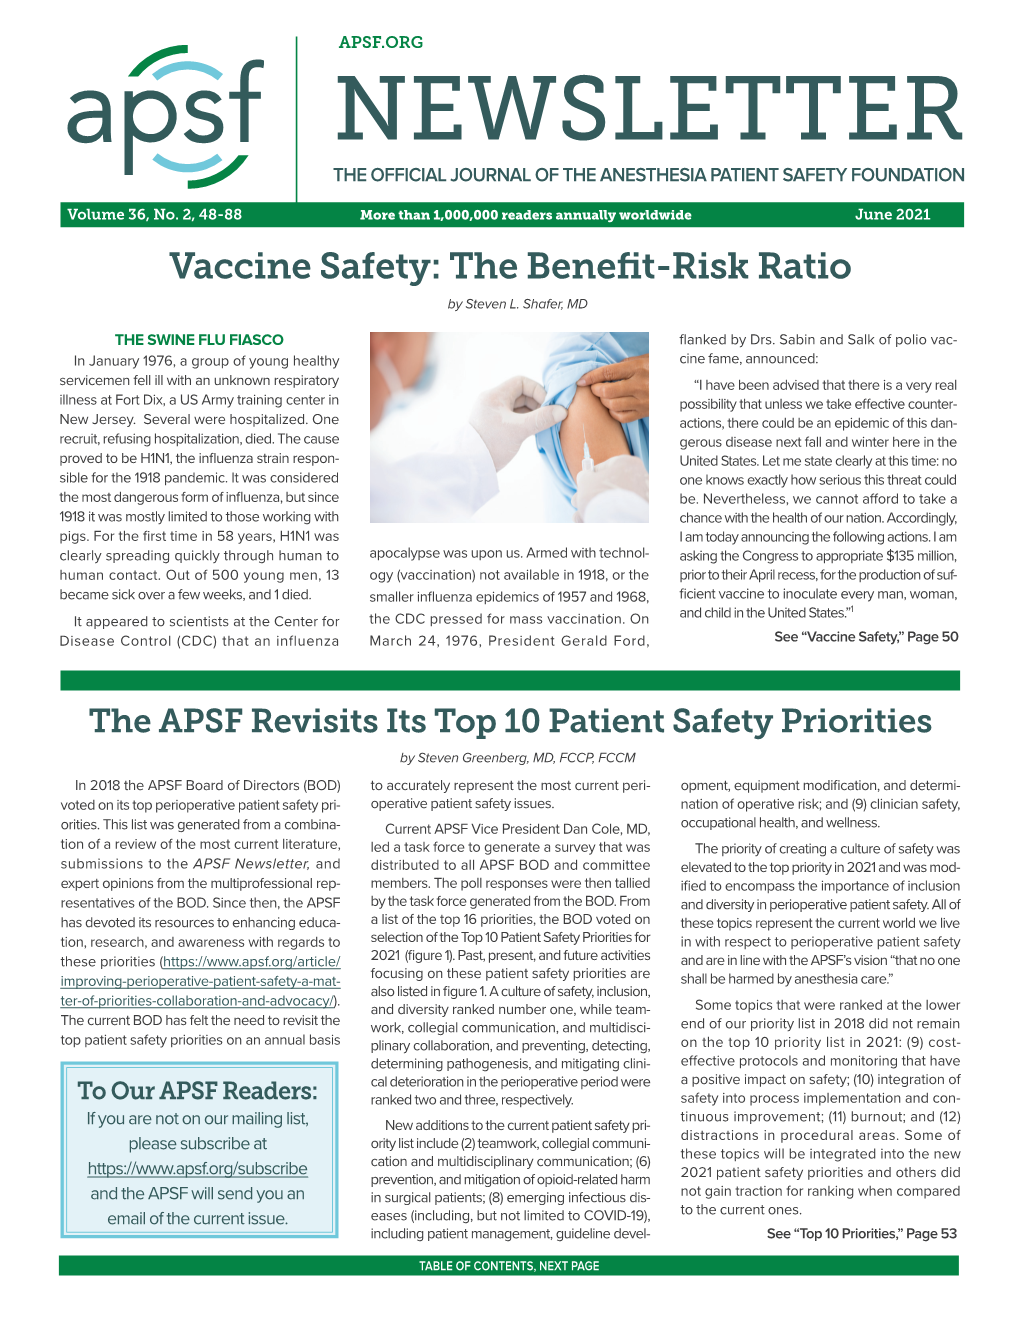 Newsletter the Official Journal of the Anesthesia Patient Safety Foundation